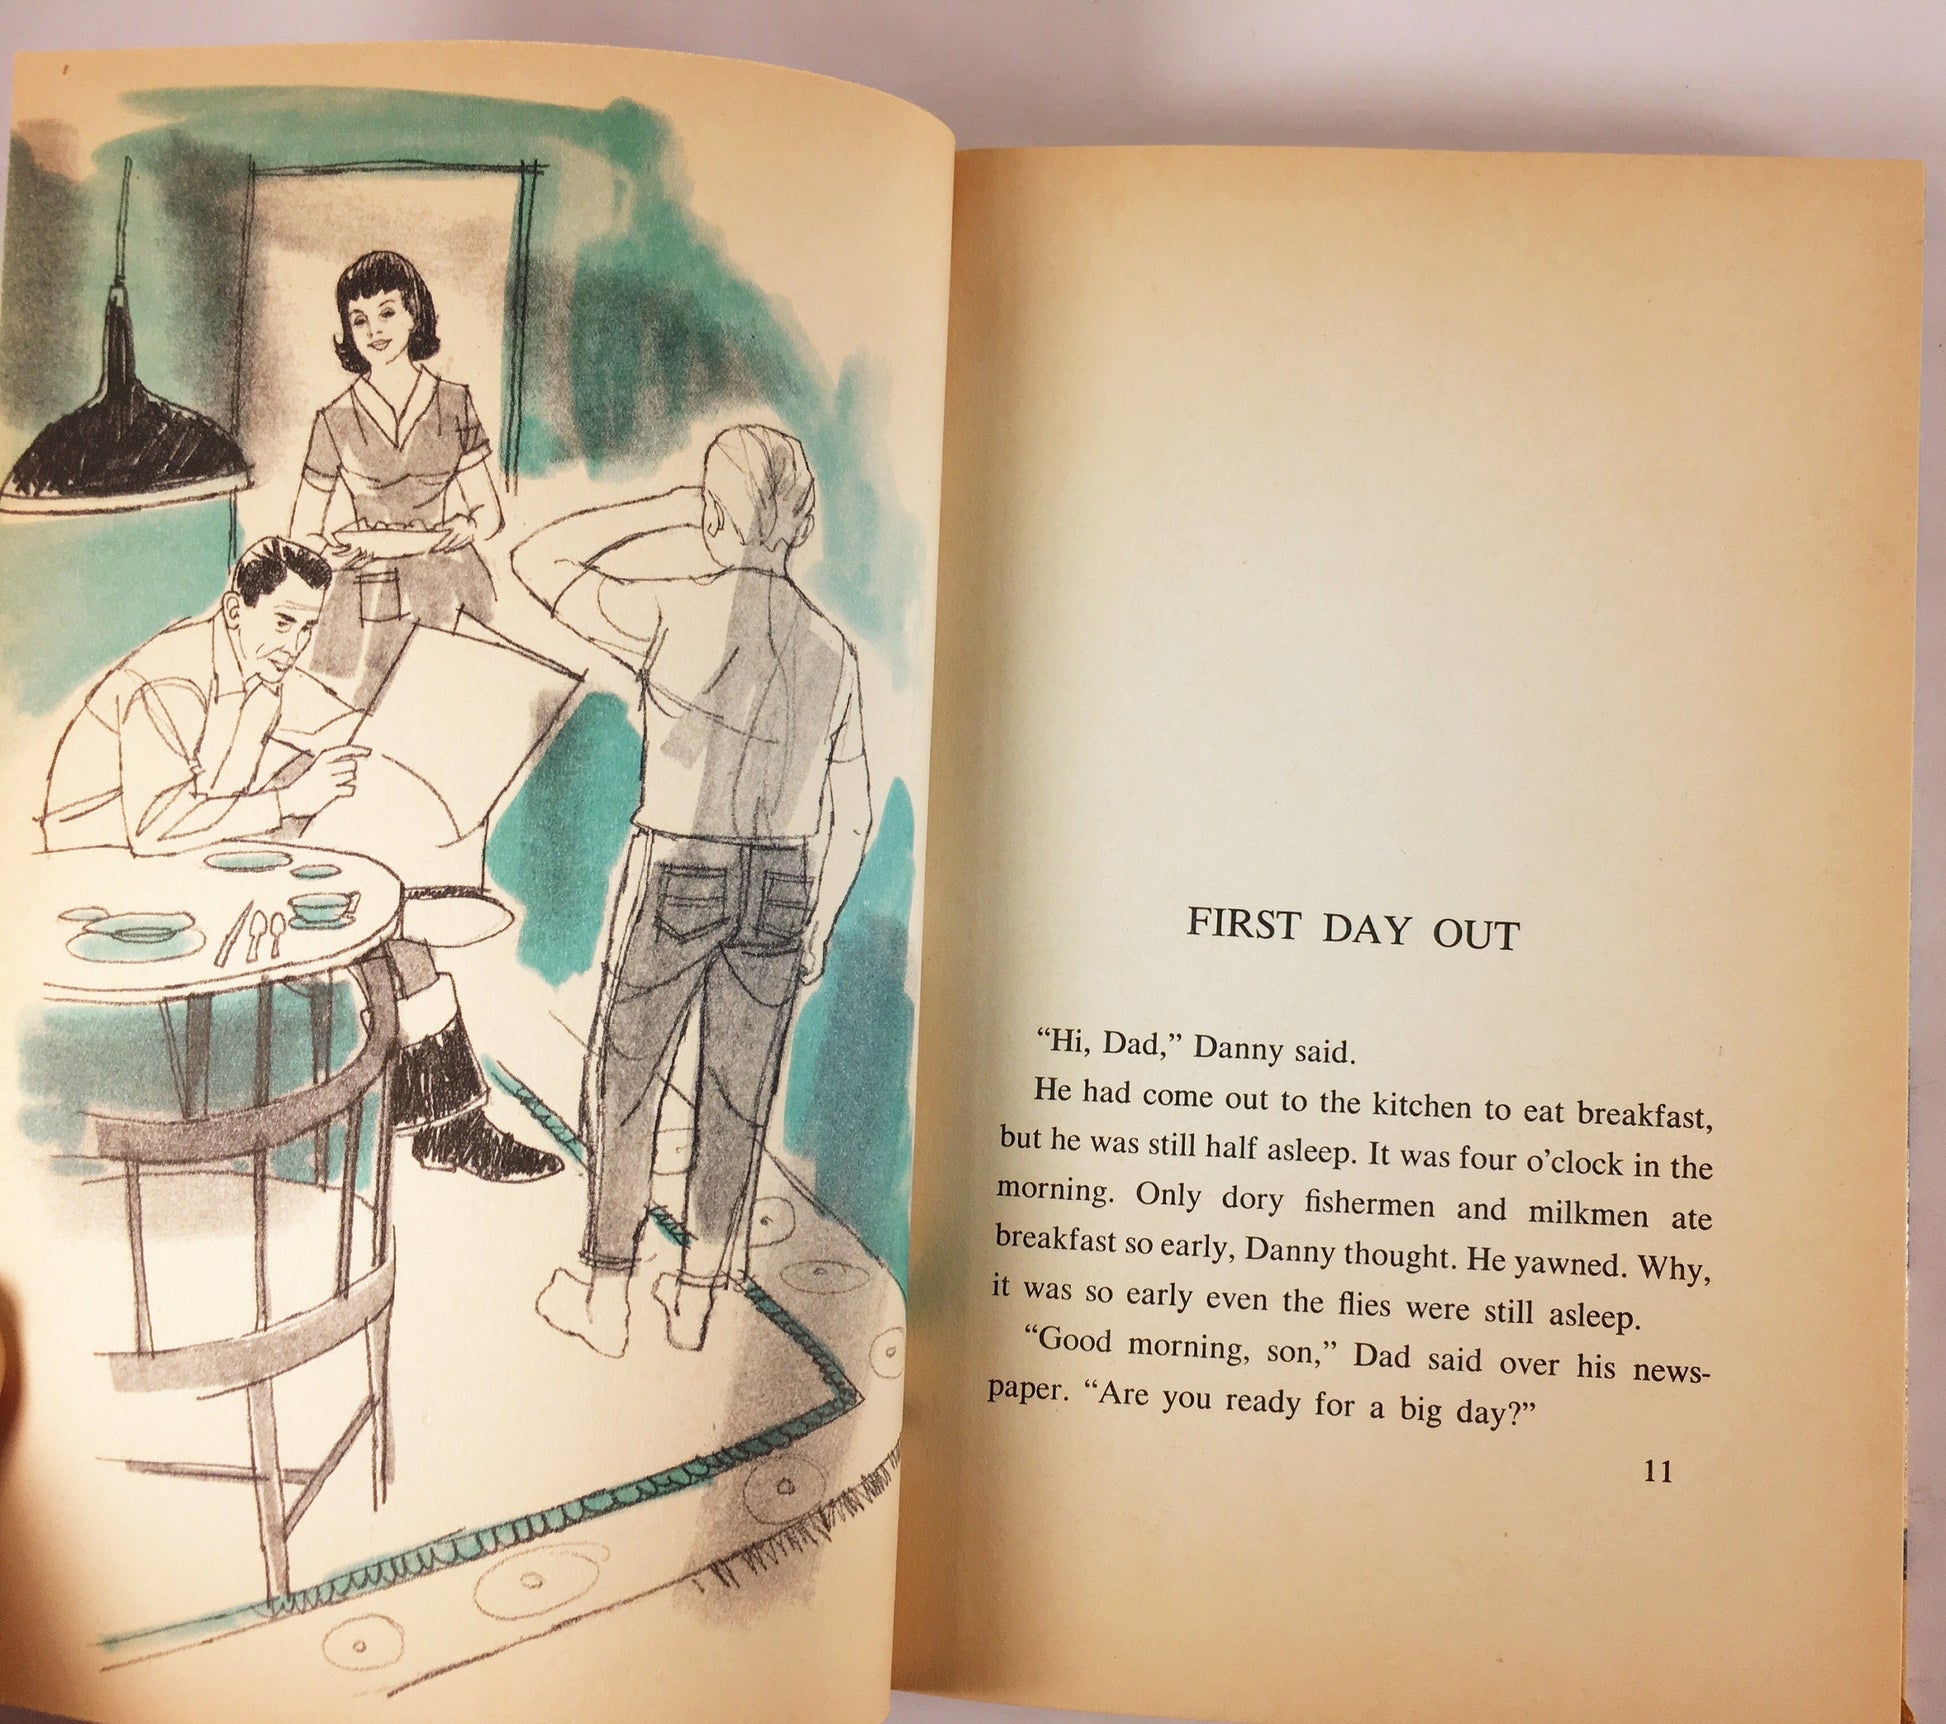 1966 Dory Boy by Joan Talmage Weiss about a teenage boy and summer challenges. Vintage cello book Whitman Publishing